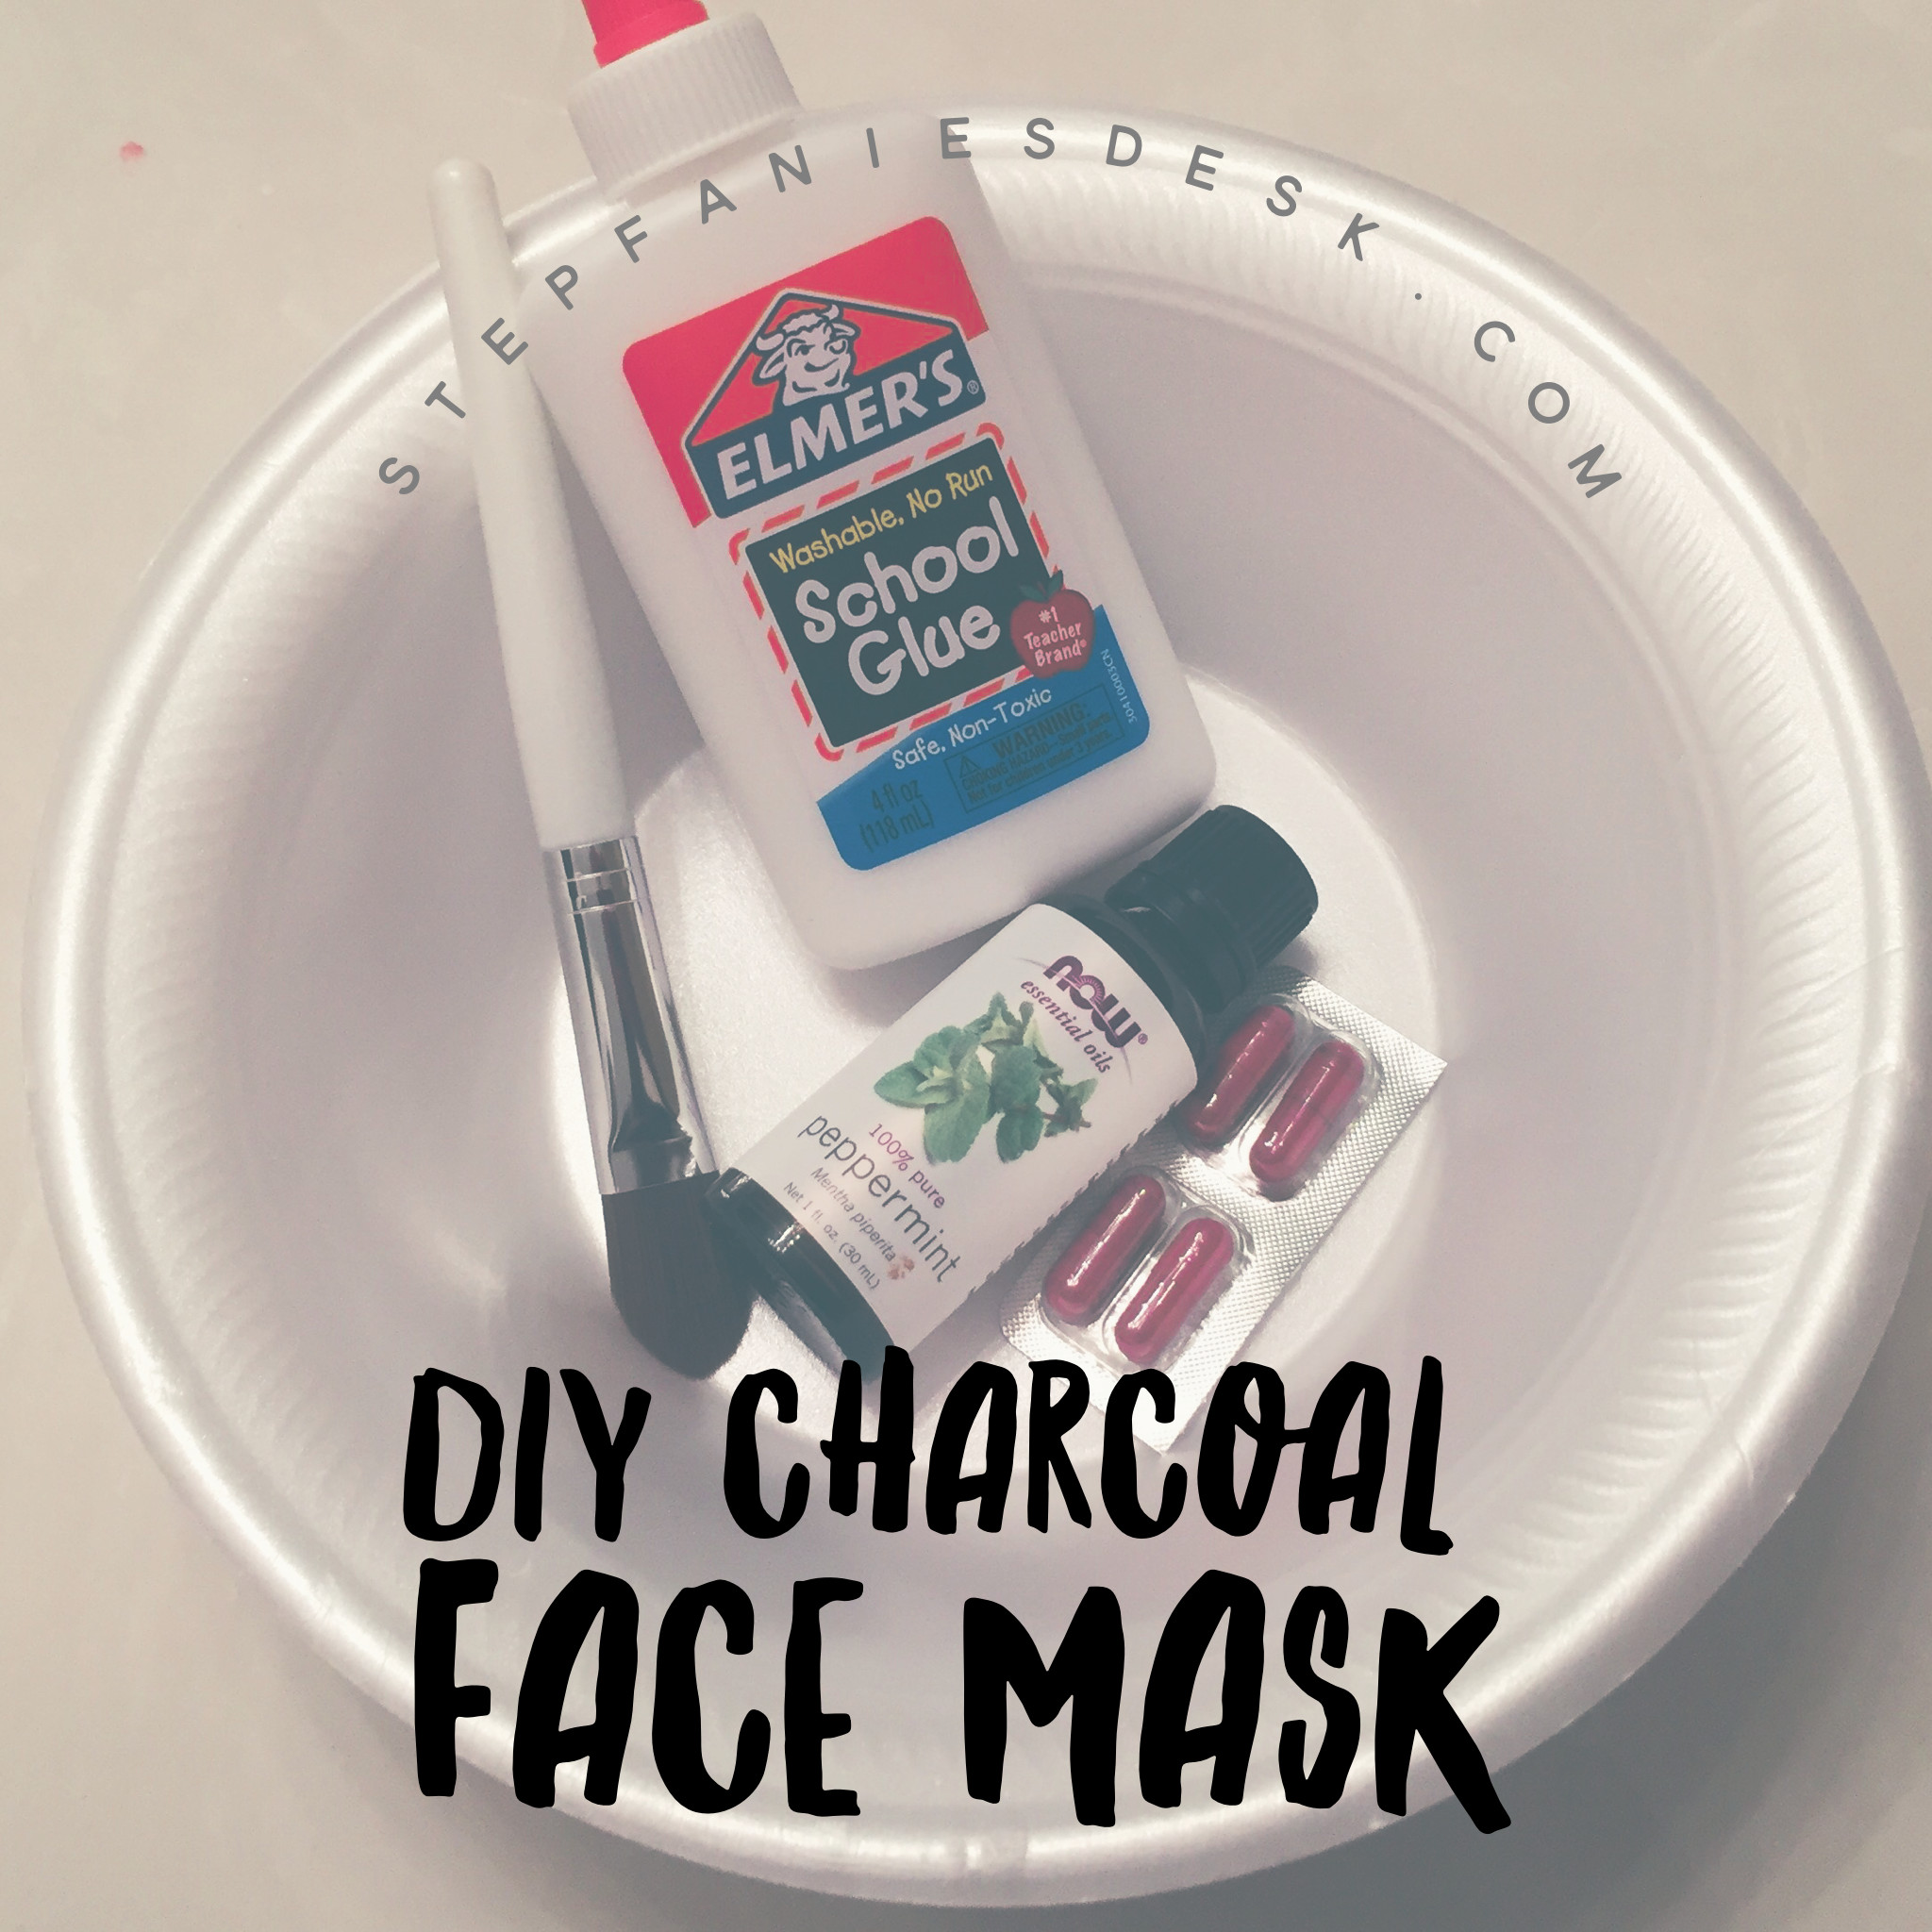 Charcoal And Glue Mask DIY
 DIY Charcoal Face Mask